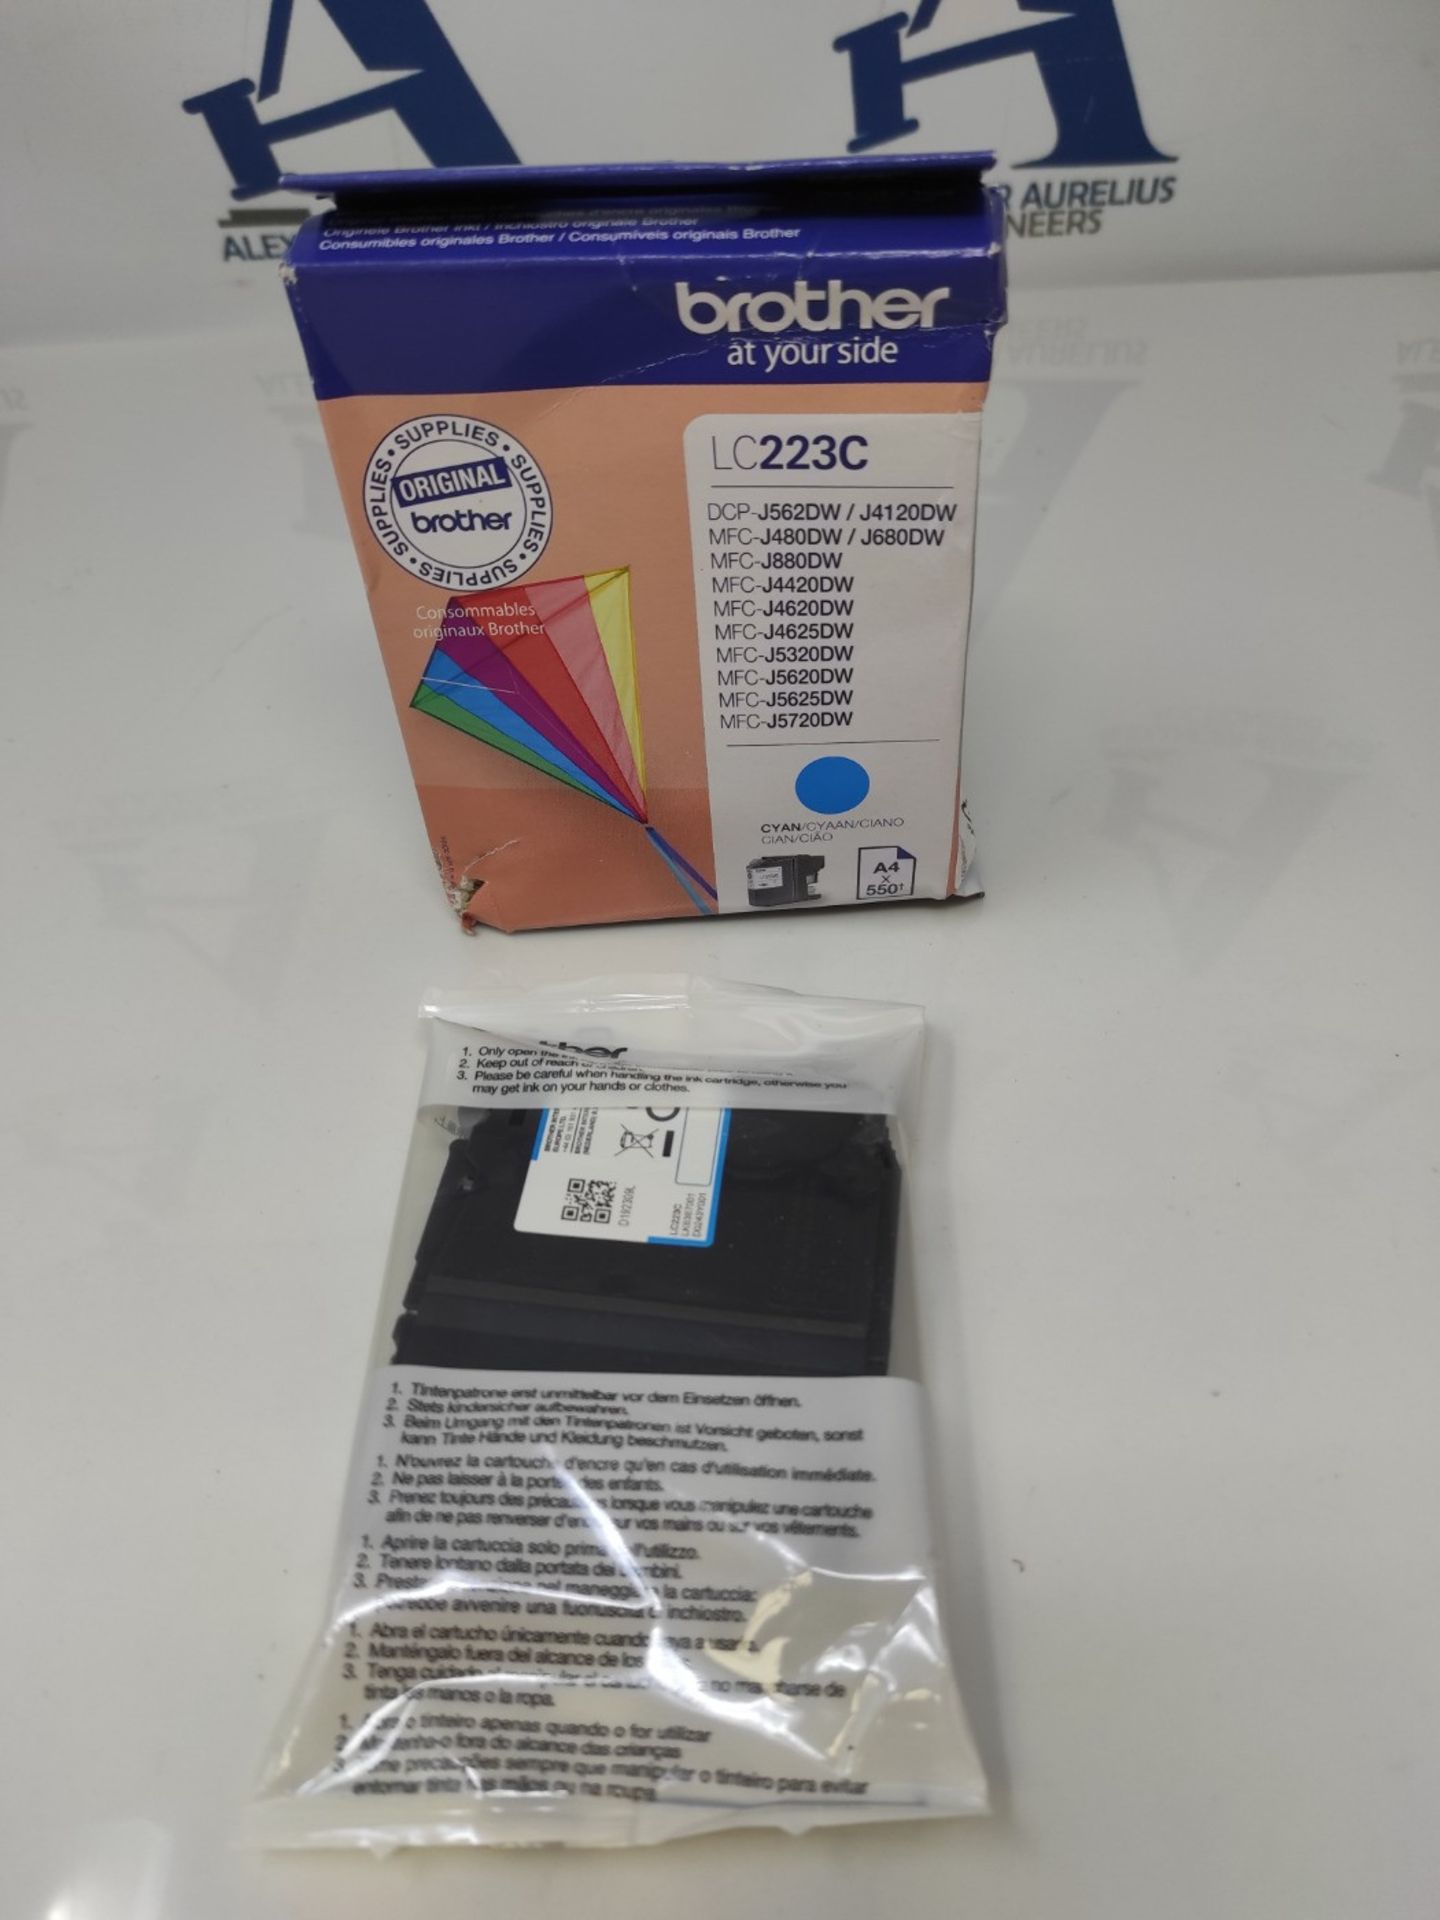 Brother LC223C Original Ink Cartridge LC-223C cyan (for Brother DCP-J562DW, DCP-J4120D - Image 2 of 3